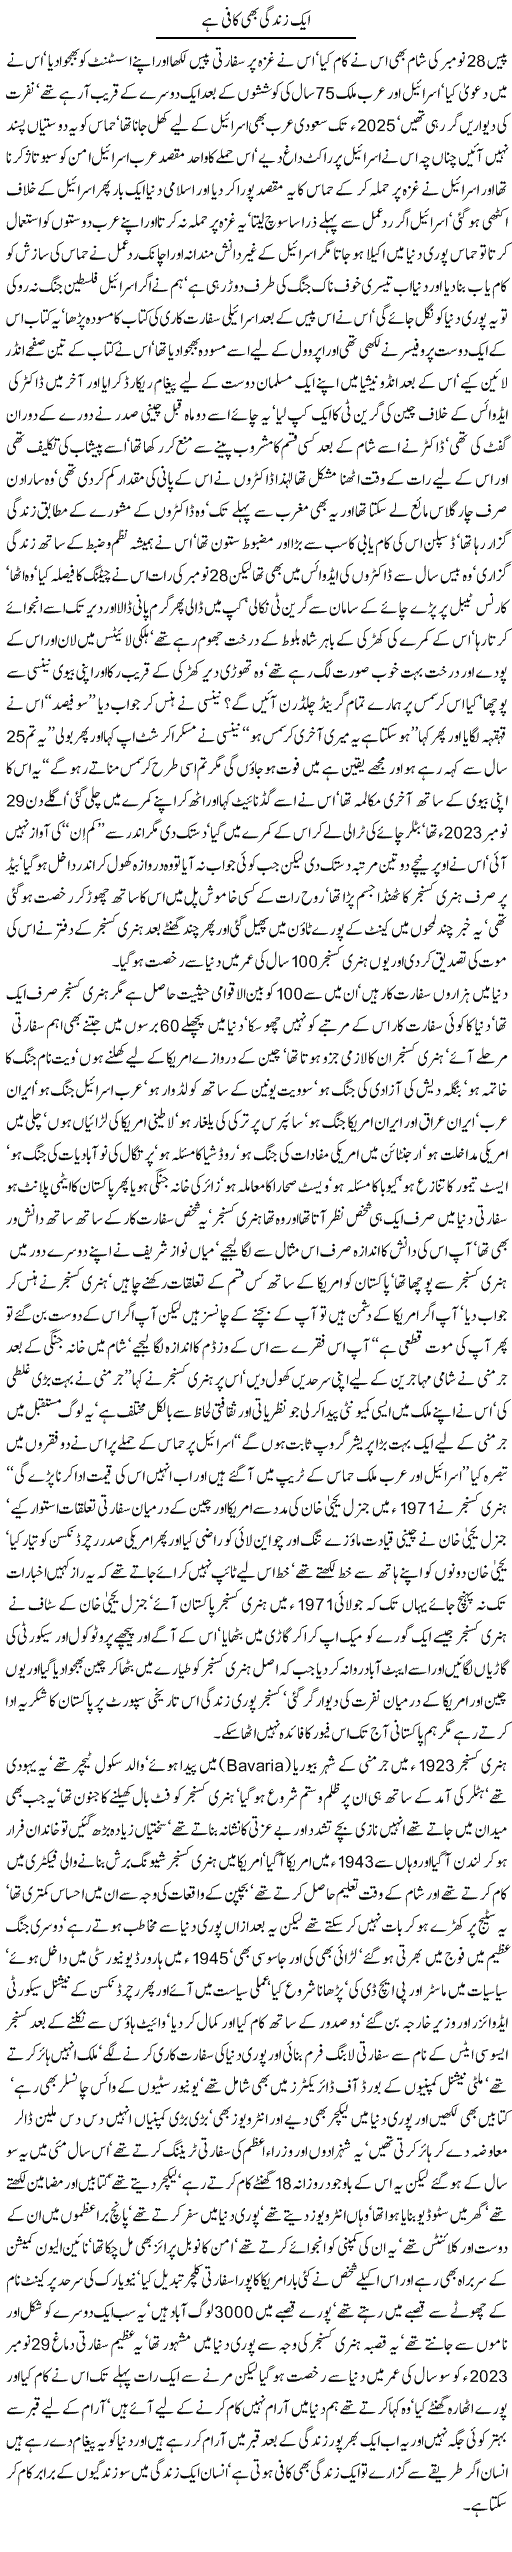 Javed Chaudhry Column About USA Diplomat Henry Alfred Kissinger